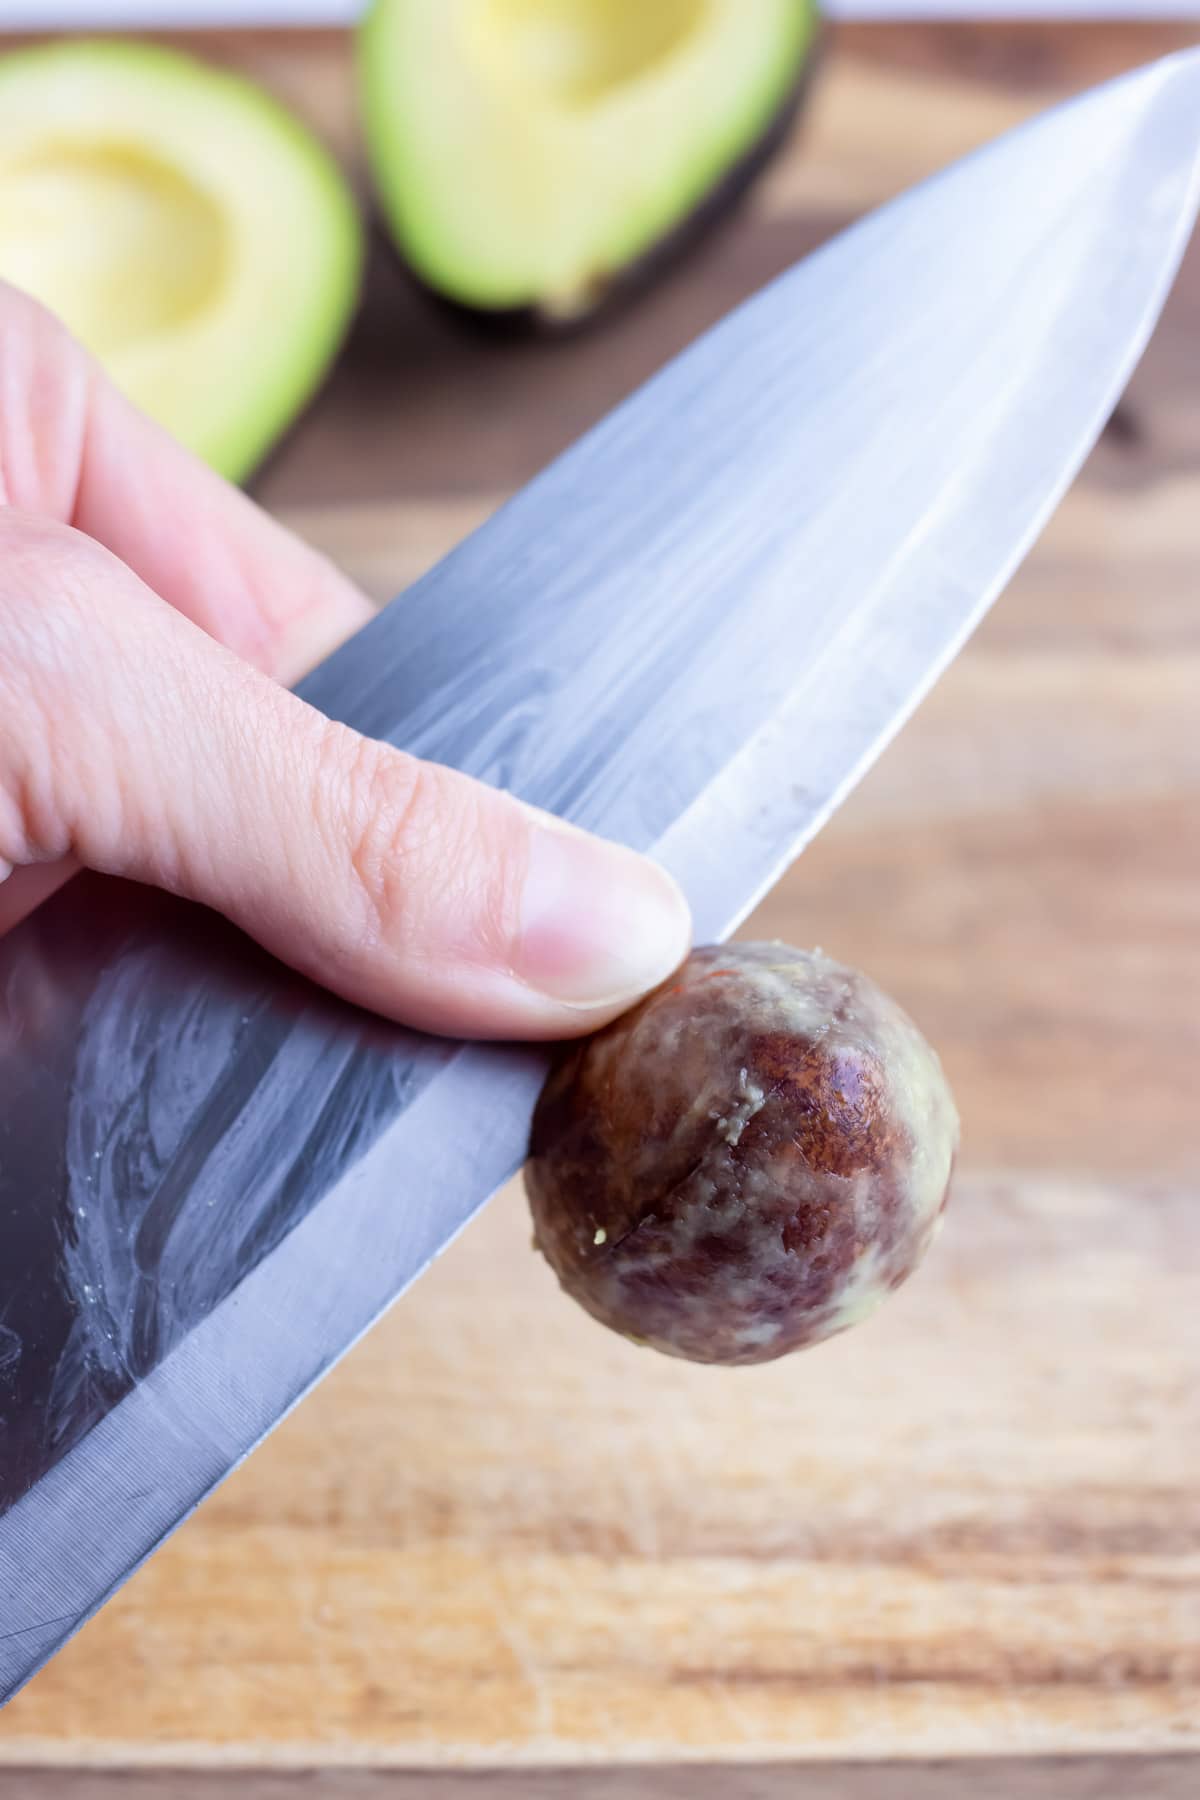 How to Cut an Avocado (The Easy Way!) - Evolving Table